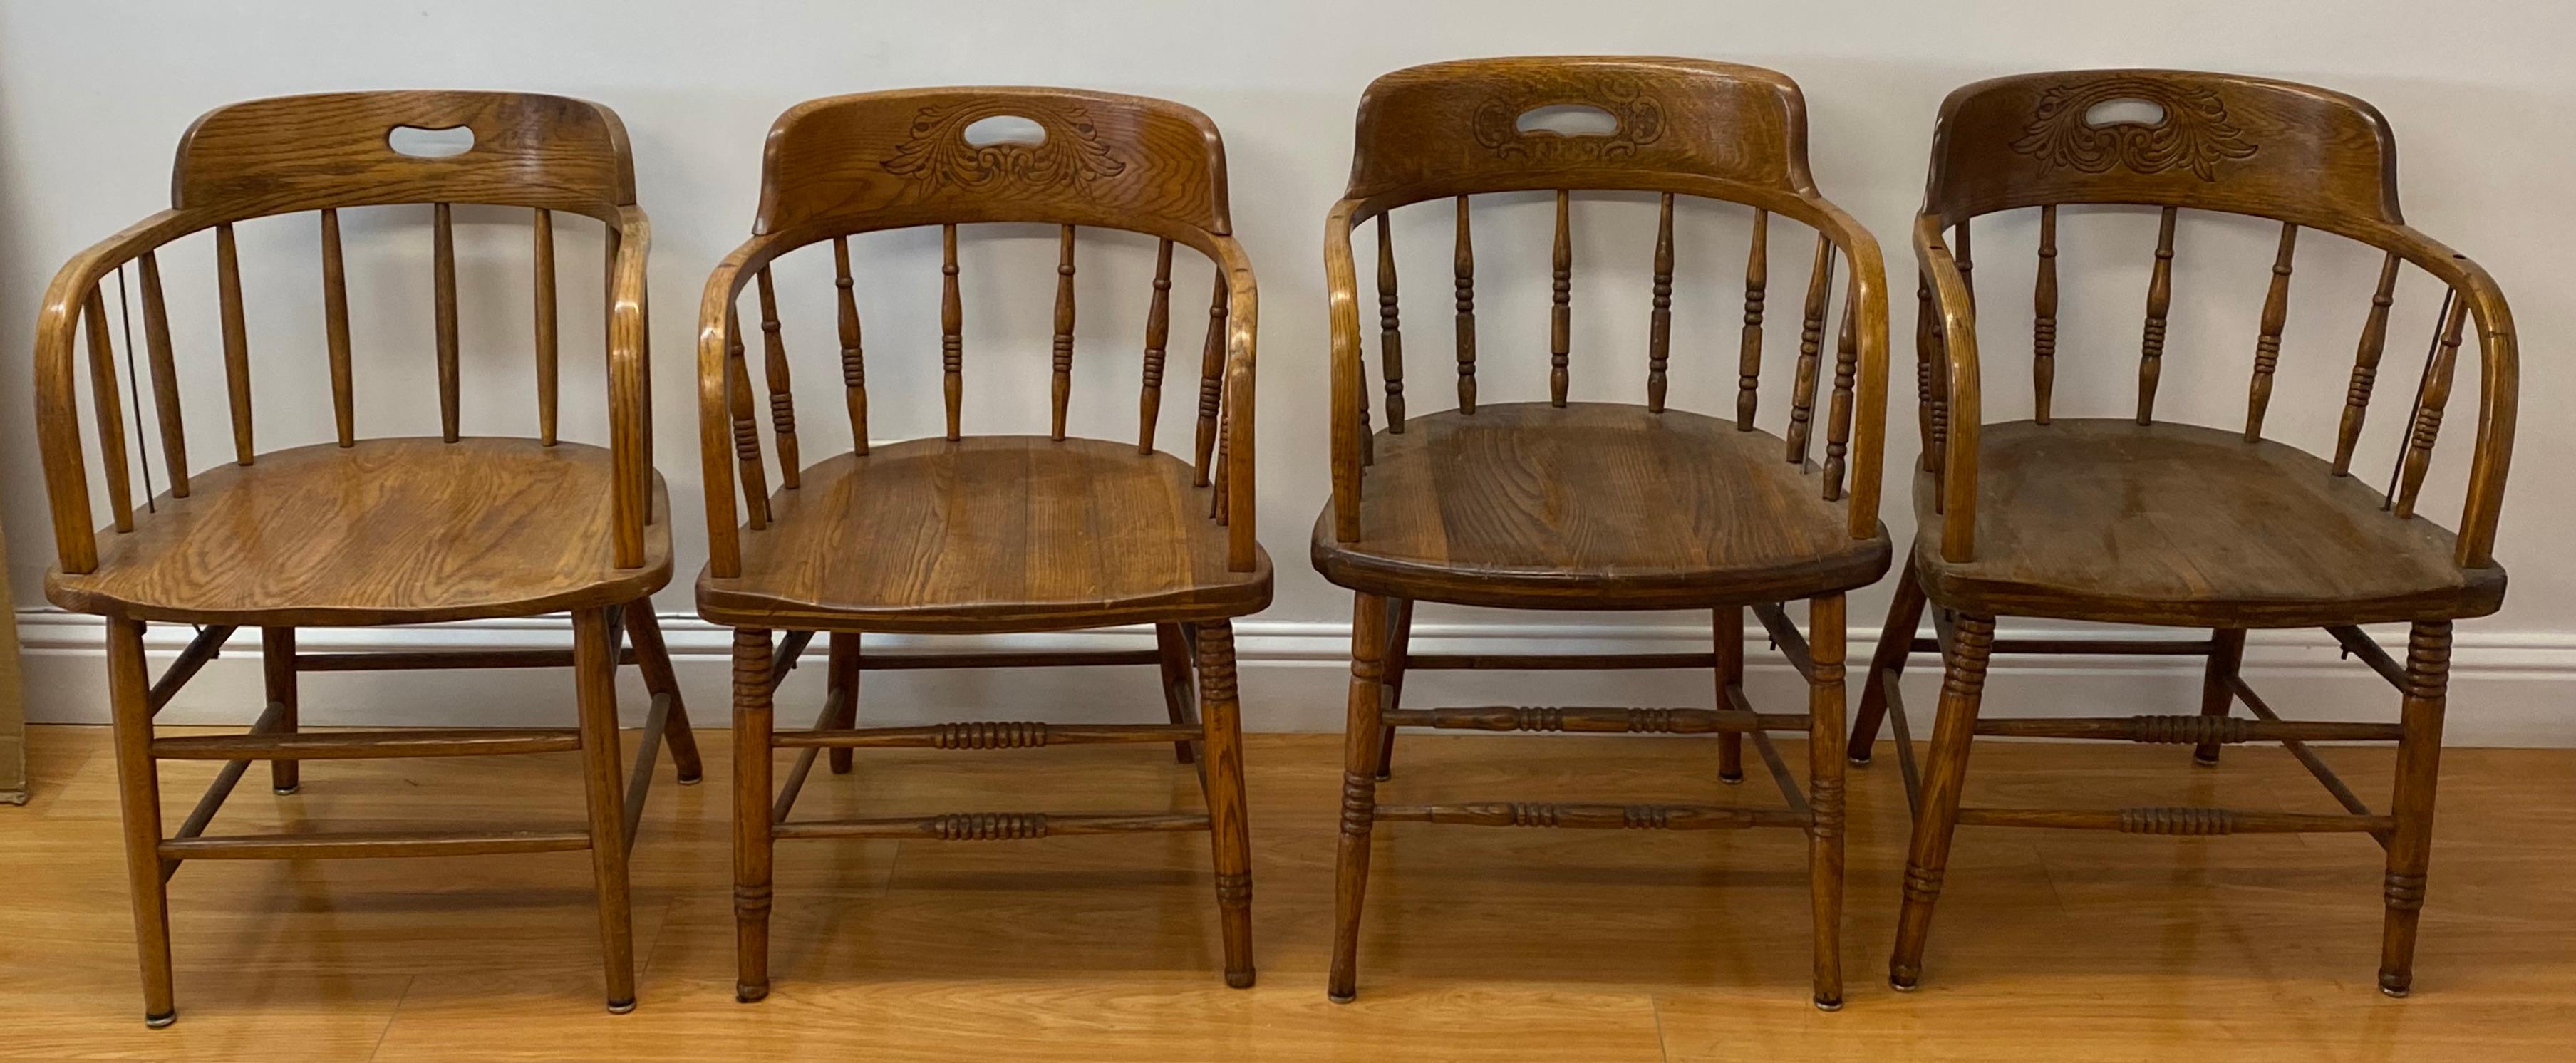 Hand-Crafted Set of Four Early 20th Century Mismatched Barrel Back Oak Pub Chairs